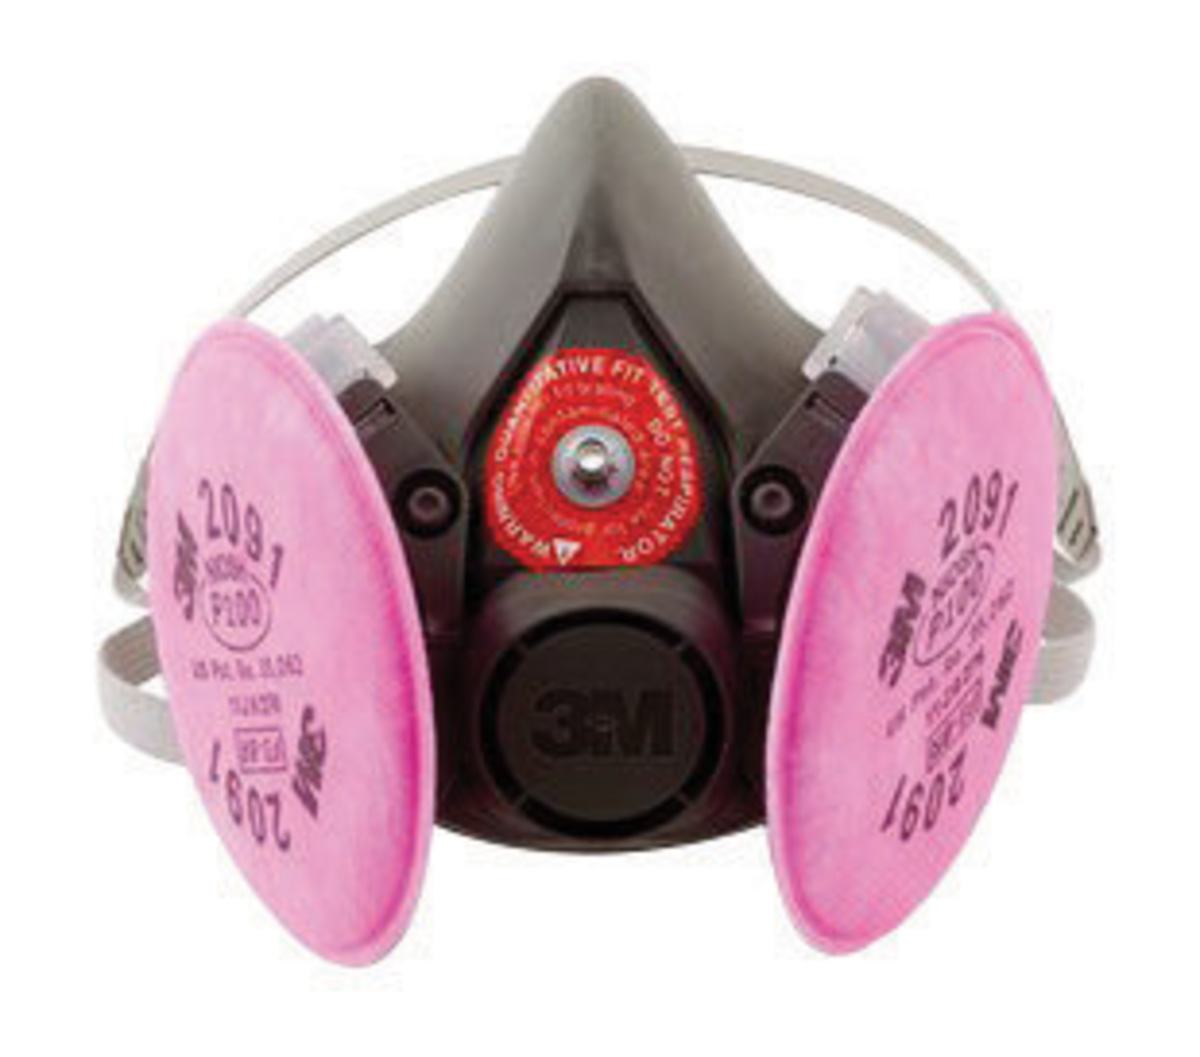 3M™ Large 6300 Series Half Face ReusableFit Test Air Purifying Respirator (Availability restrictions apply.)